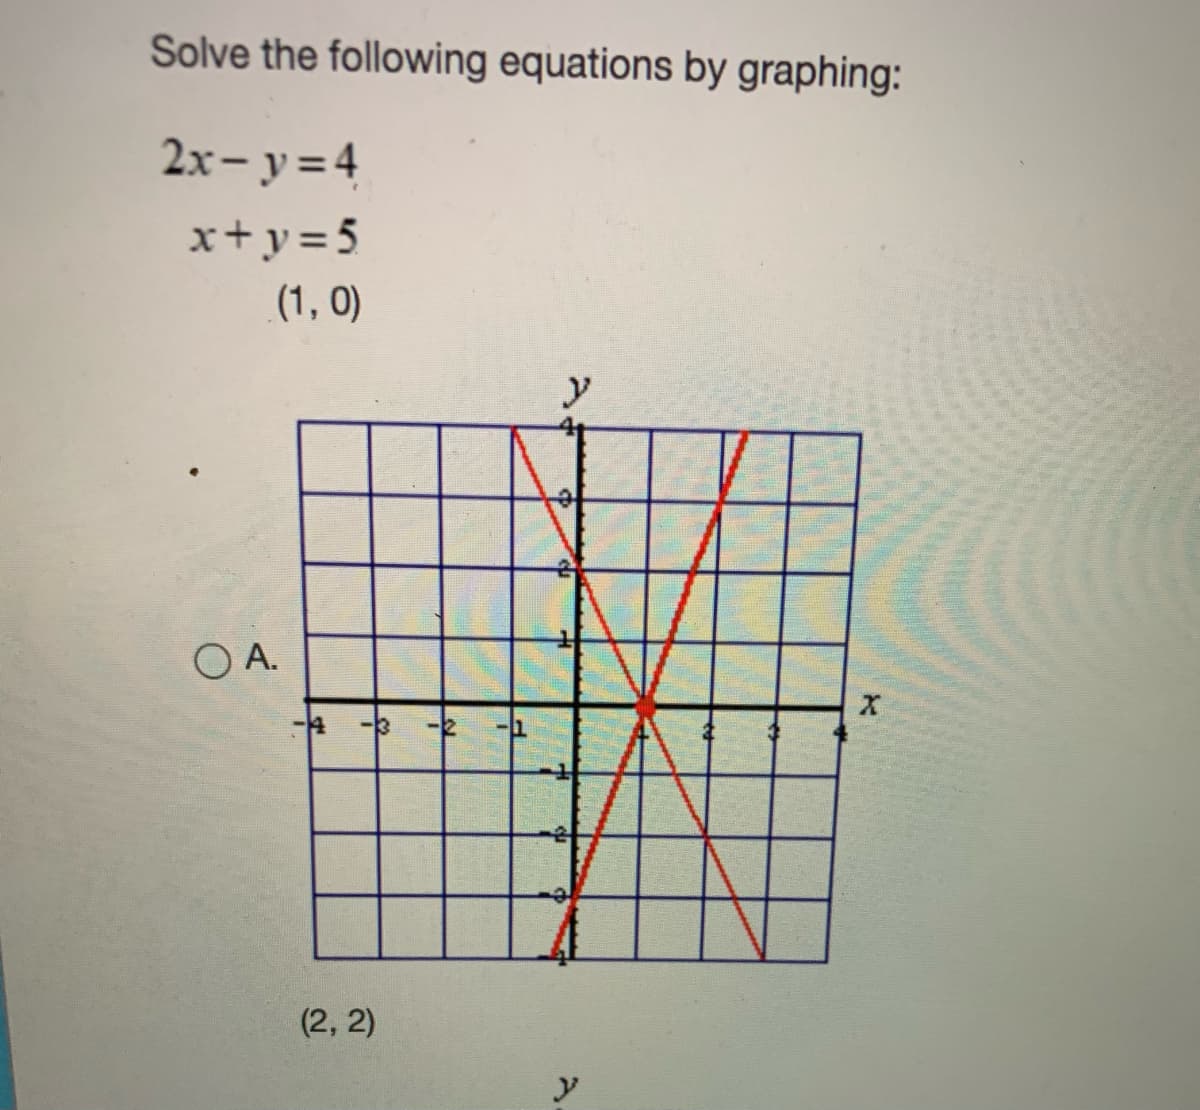 Solve the following equations by graphing:
2x - y = 4
x+y=5
(1, 0)
O A.
(2, 2)
y
